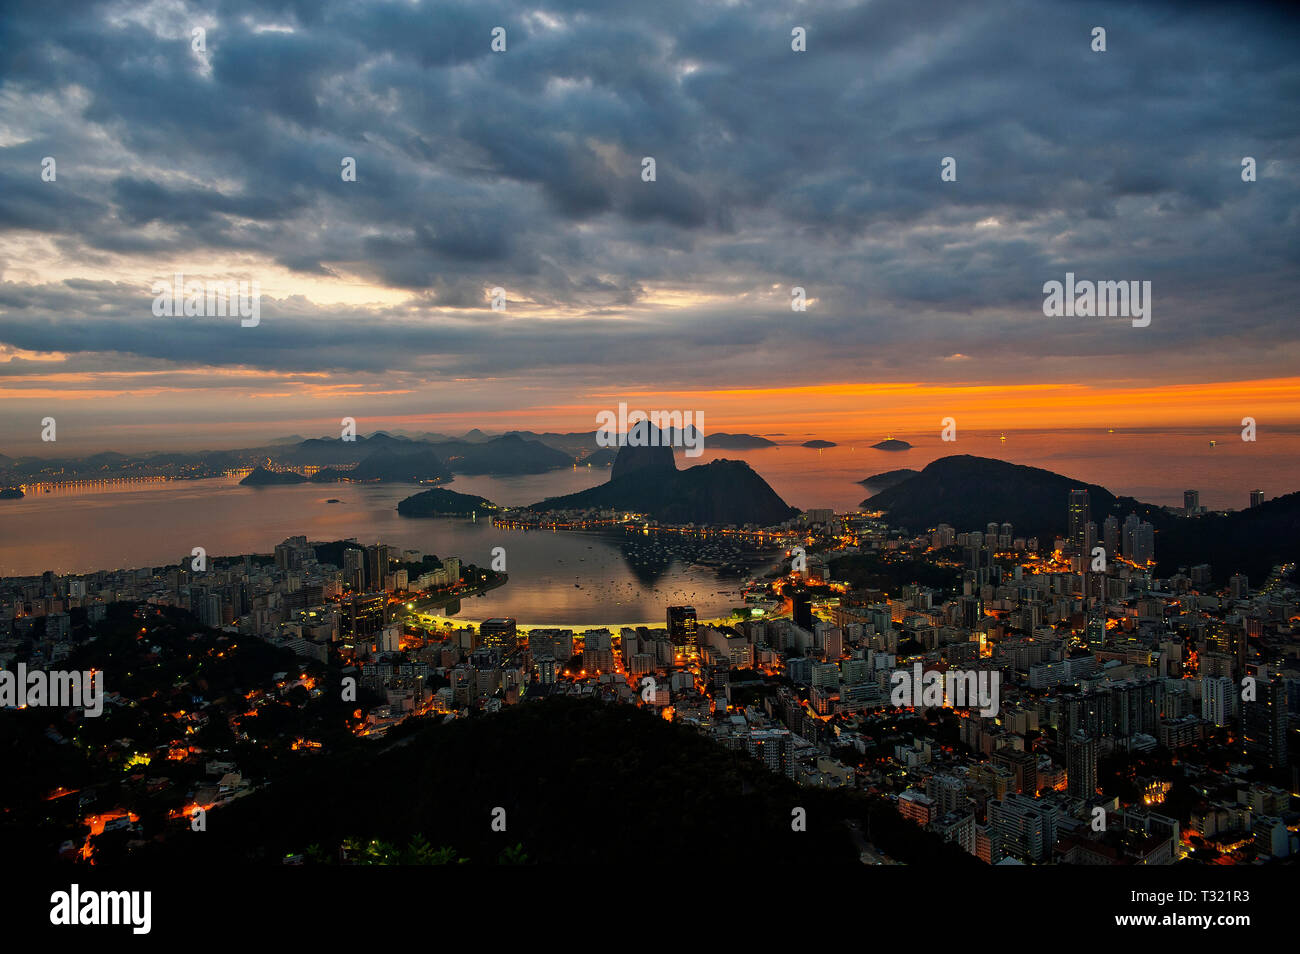 Dawn at Rio de Janeiro with Sugarloaf in the background, Brazil Stock Photo